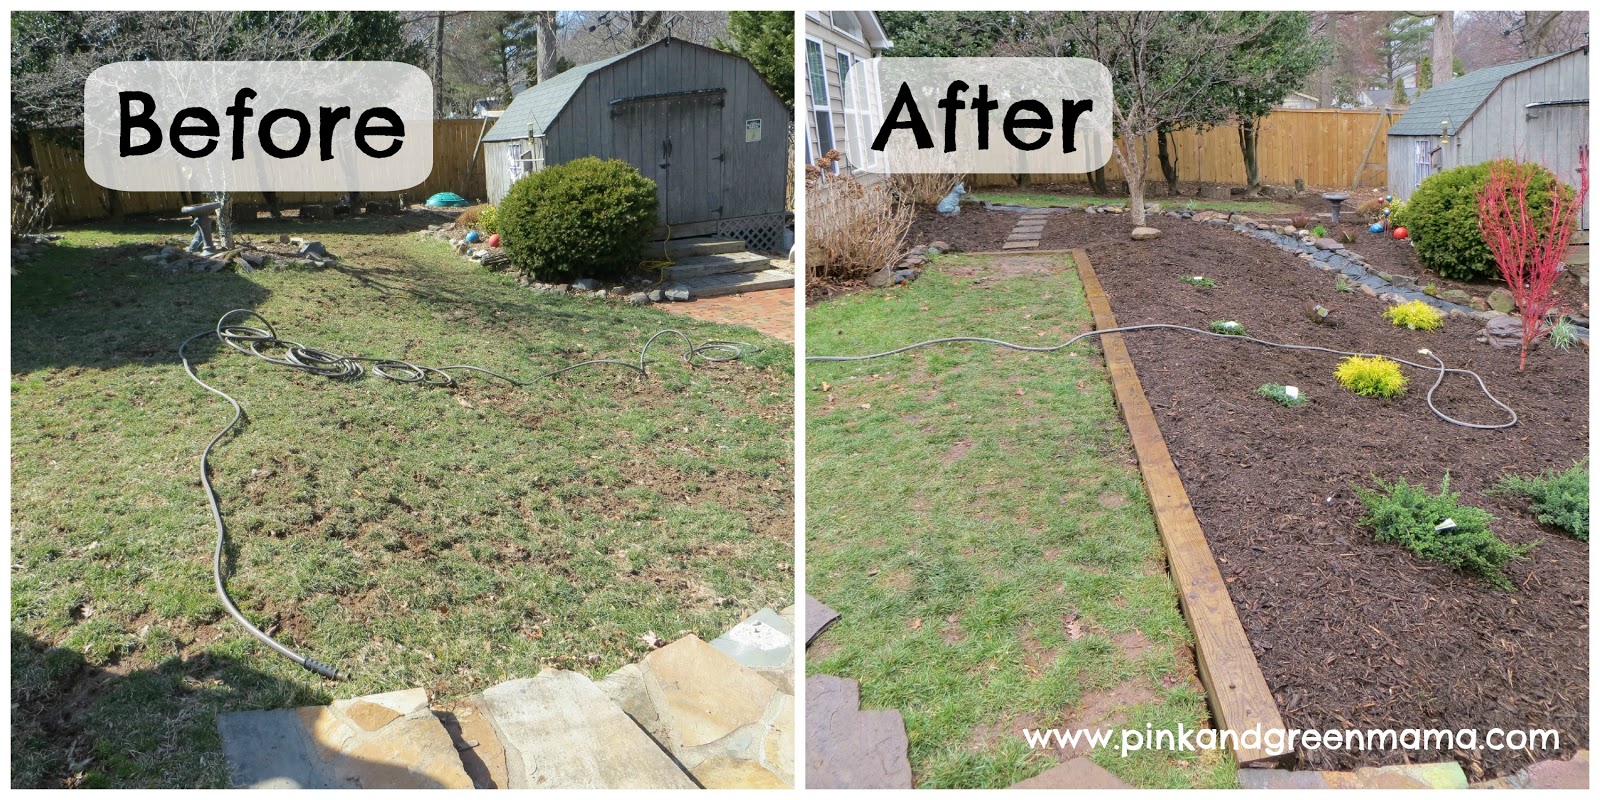 Before and After DIY Backyard Makeover on a Budget from Pink and Green 